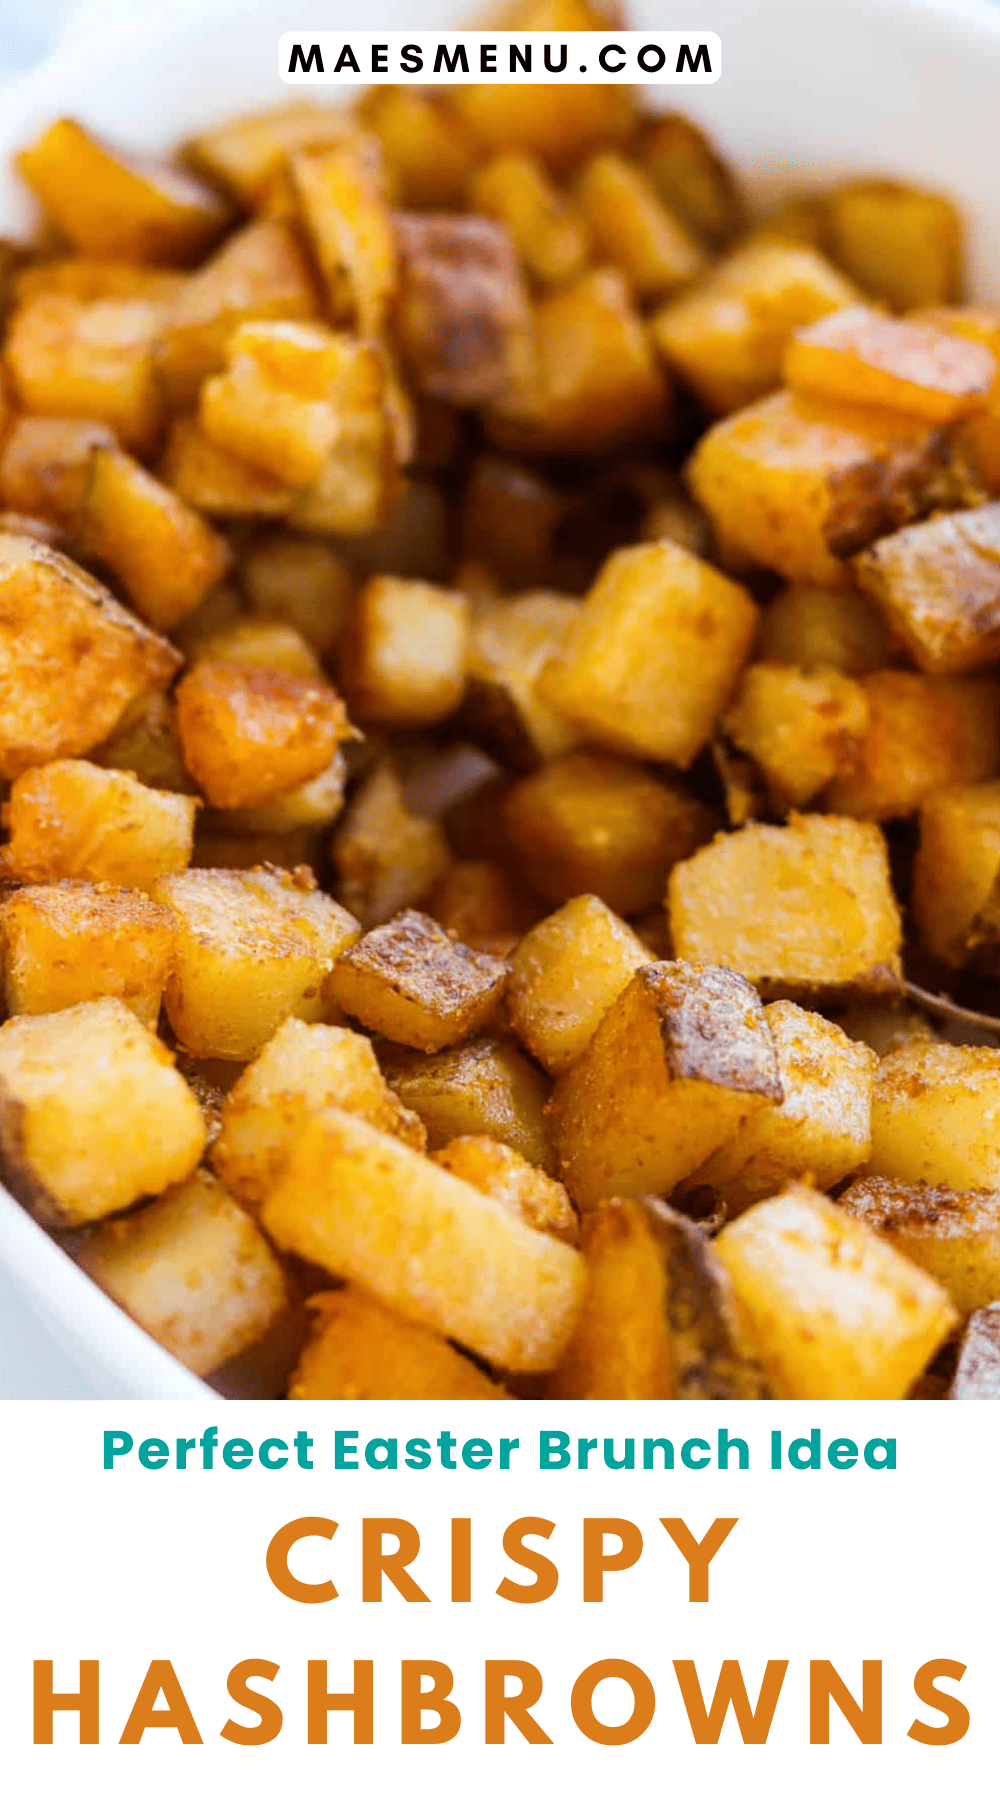 A pinterest pin for spiced hash browns.